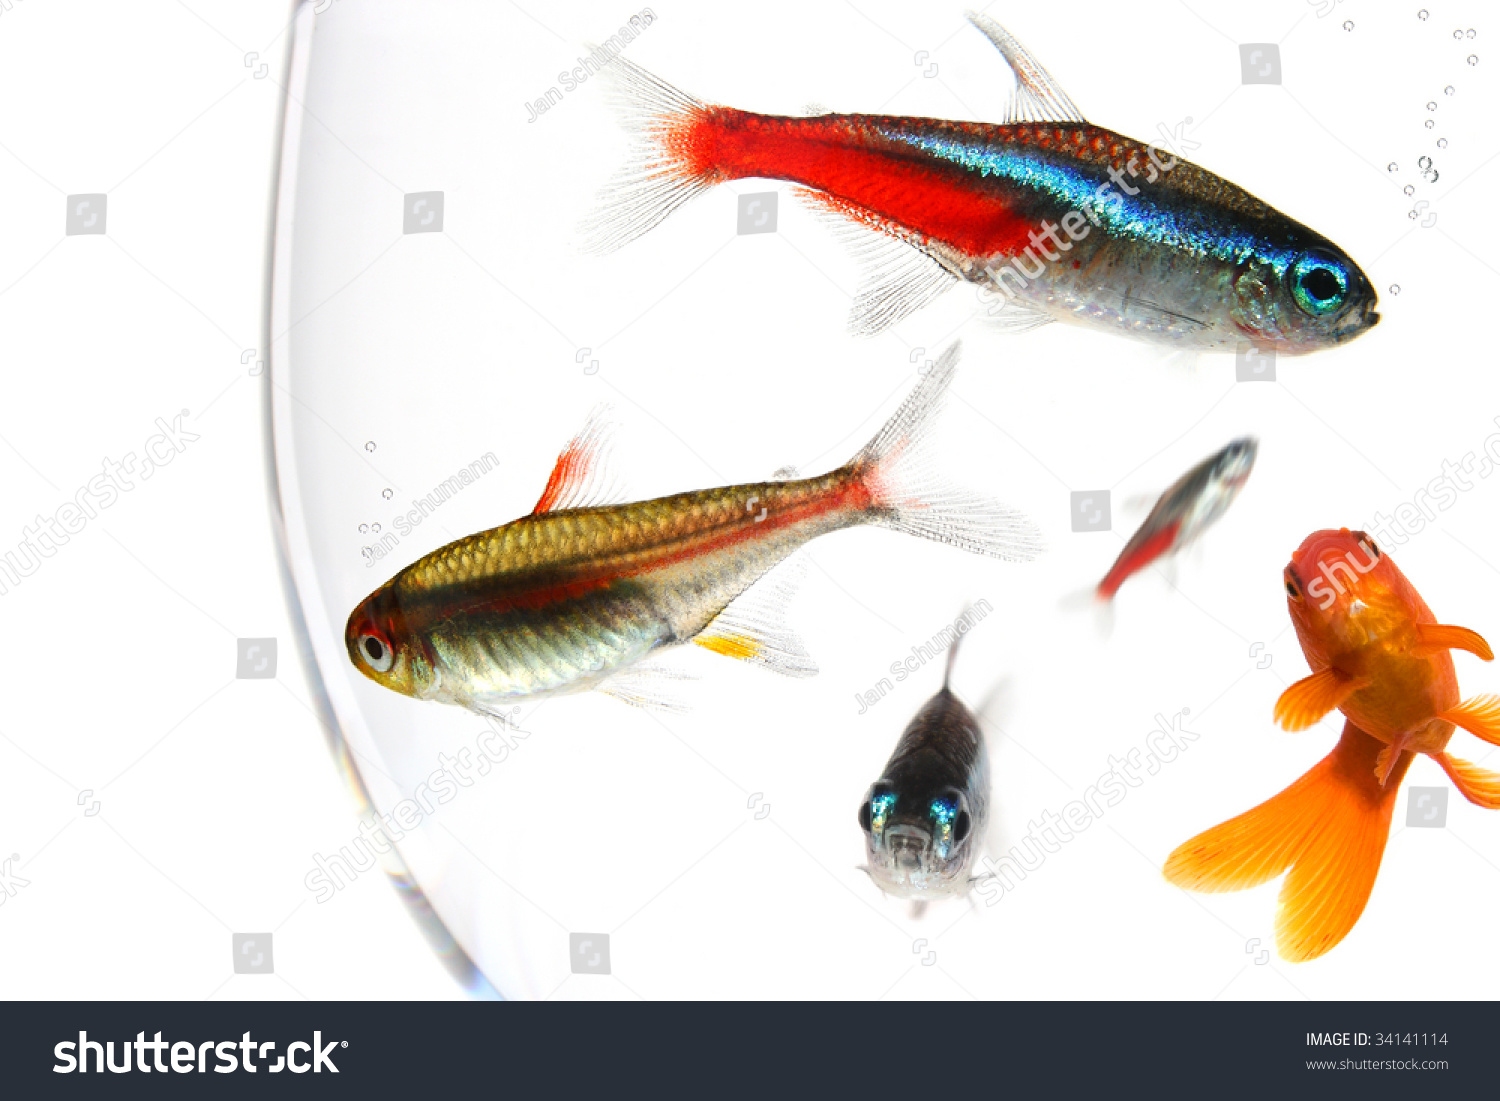 many fishes in a too small bowl #34141114